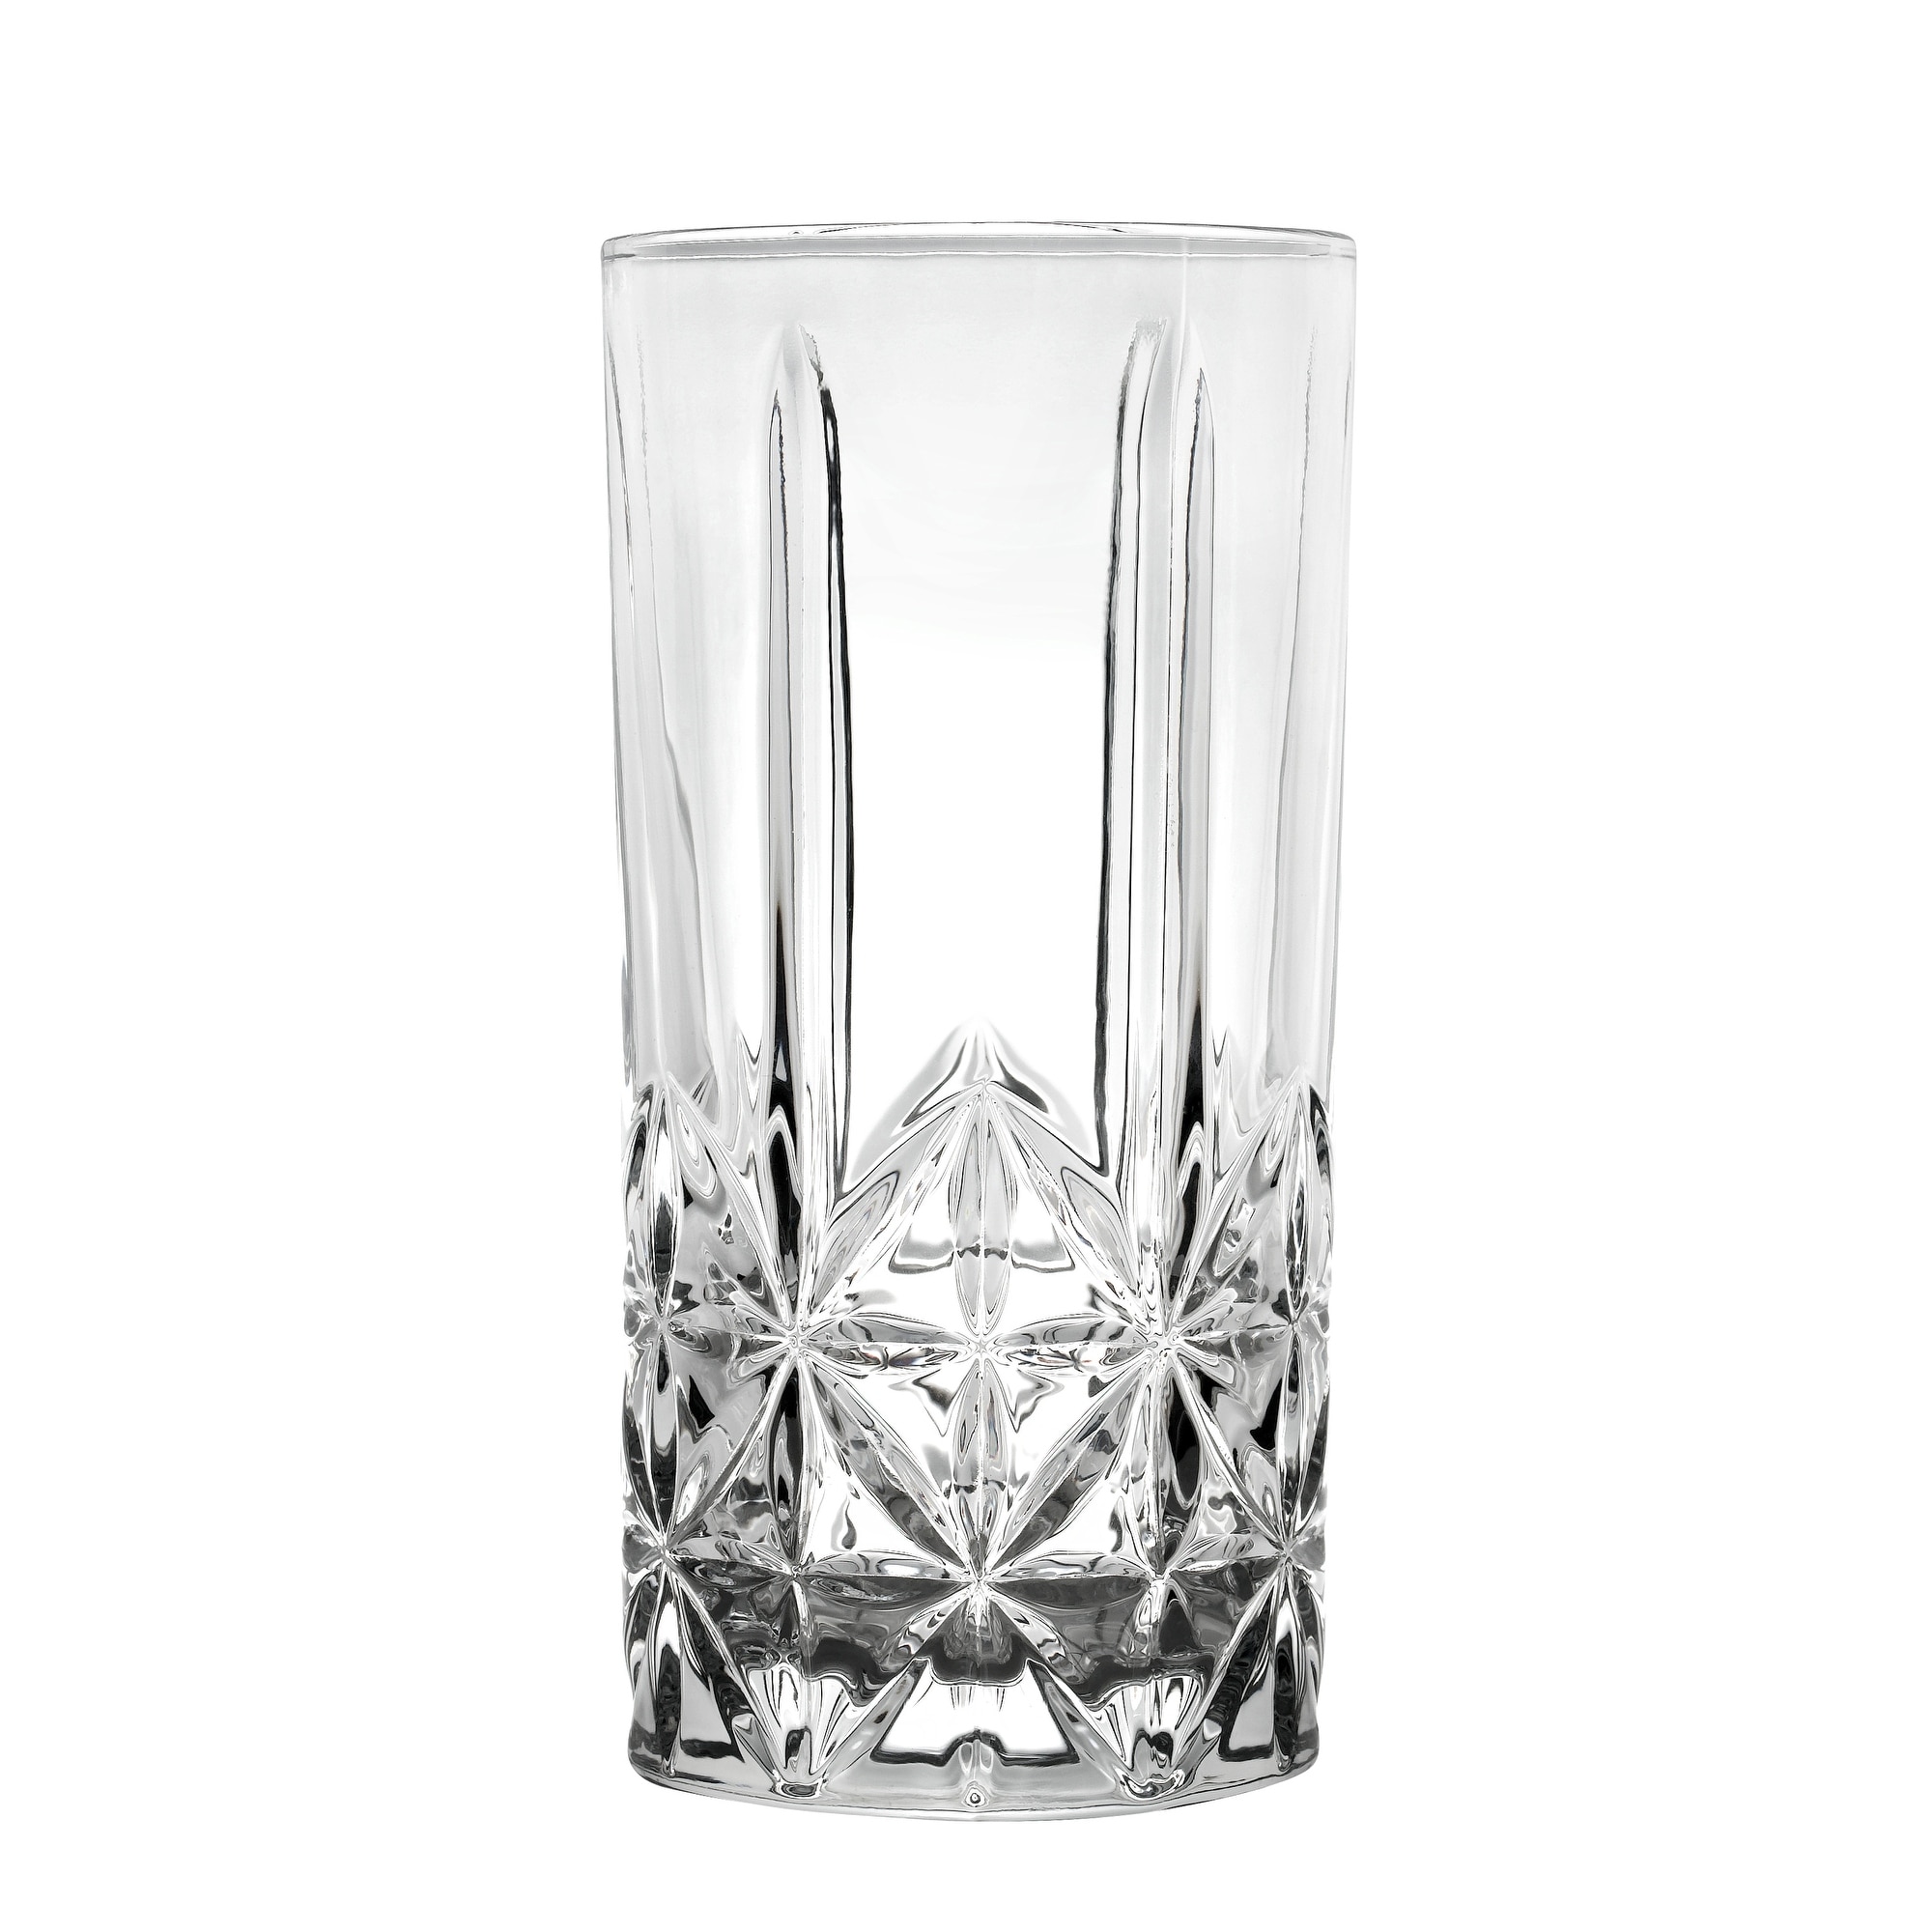 https://ak1.ostkcdn.com/images/products/is/images/direct/041d5f57edb5c07a0d2629015868df25b3e0e41f/Lorren-Home-Trends-12-OZ.-Drinking-Glass-Textured-Cut-Glass%2C-Set-of-6.jpg